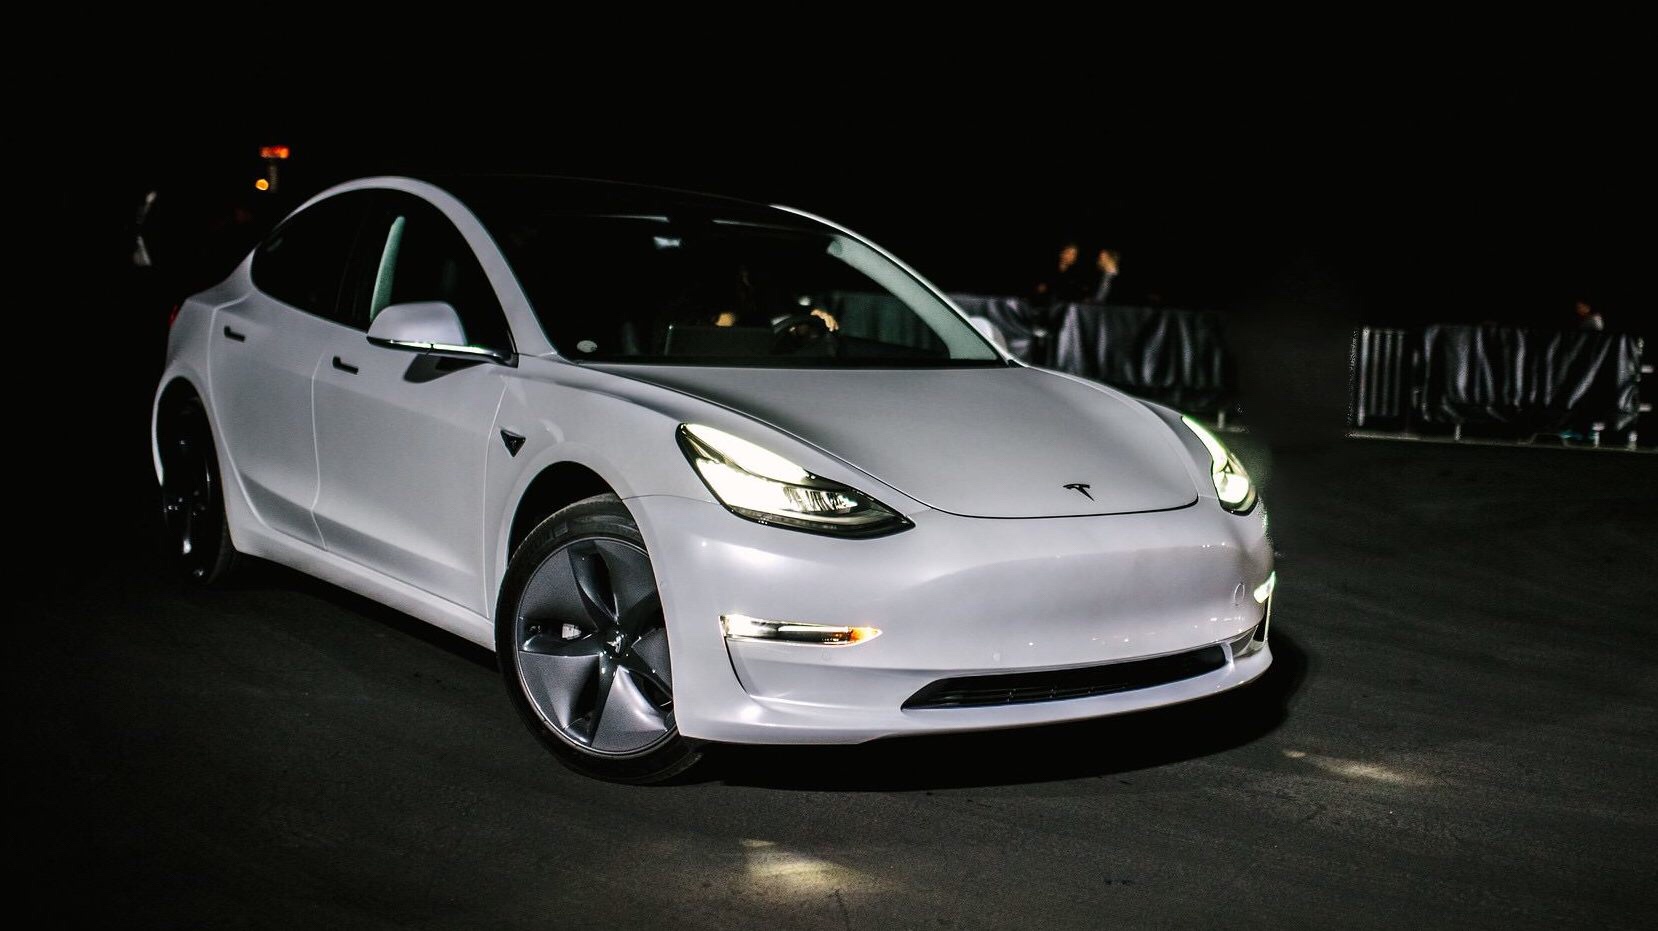 Tesla is hoping to deliver all-wheel drive Model 3 by July